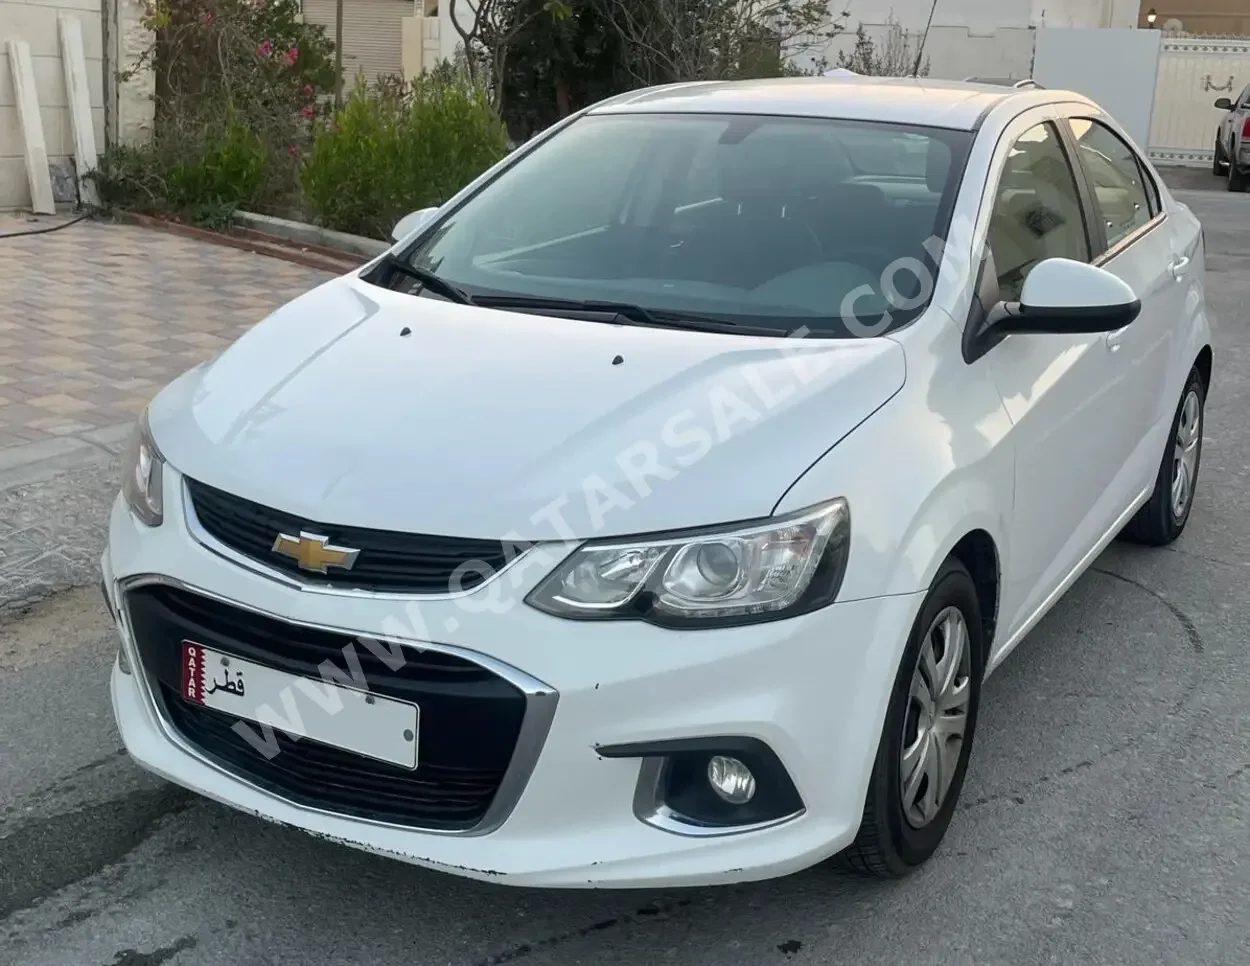 Chevrolet  Aveo  2018  Automatic  130,000 Km  4 Cylinder  Front Wheel Drive (FWD)  Sedan  White